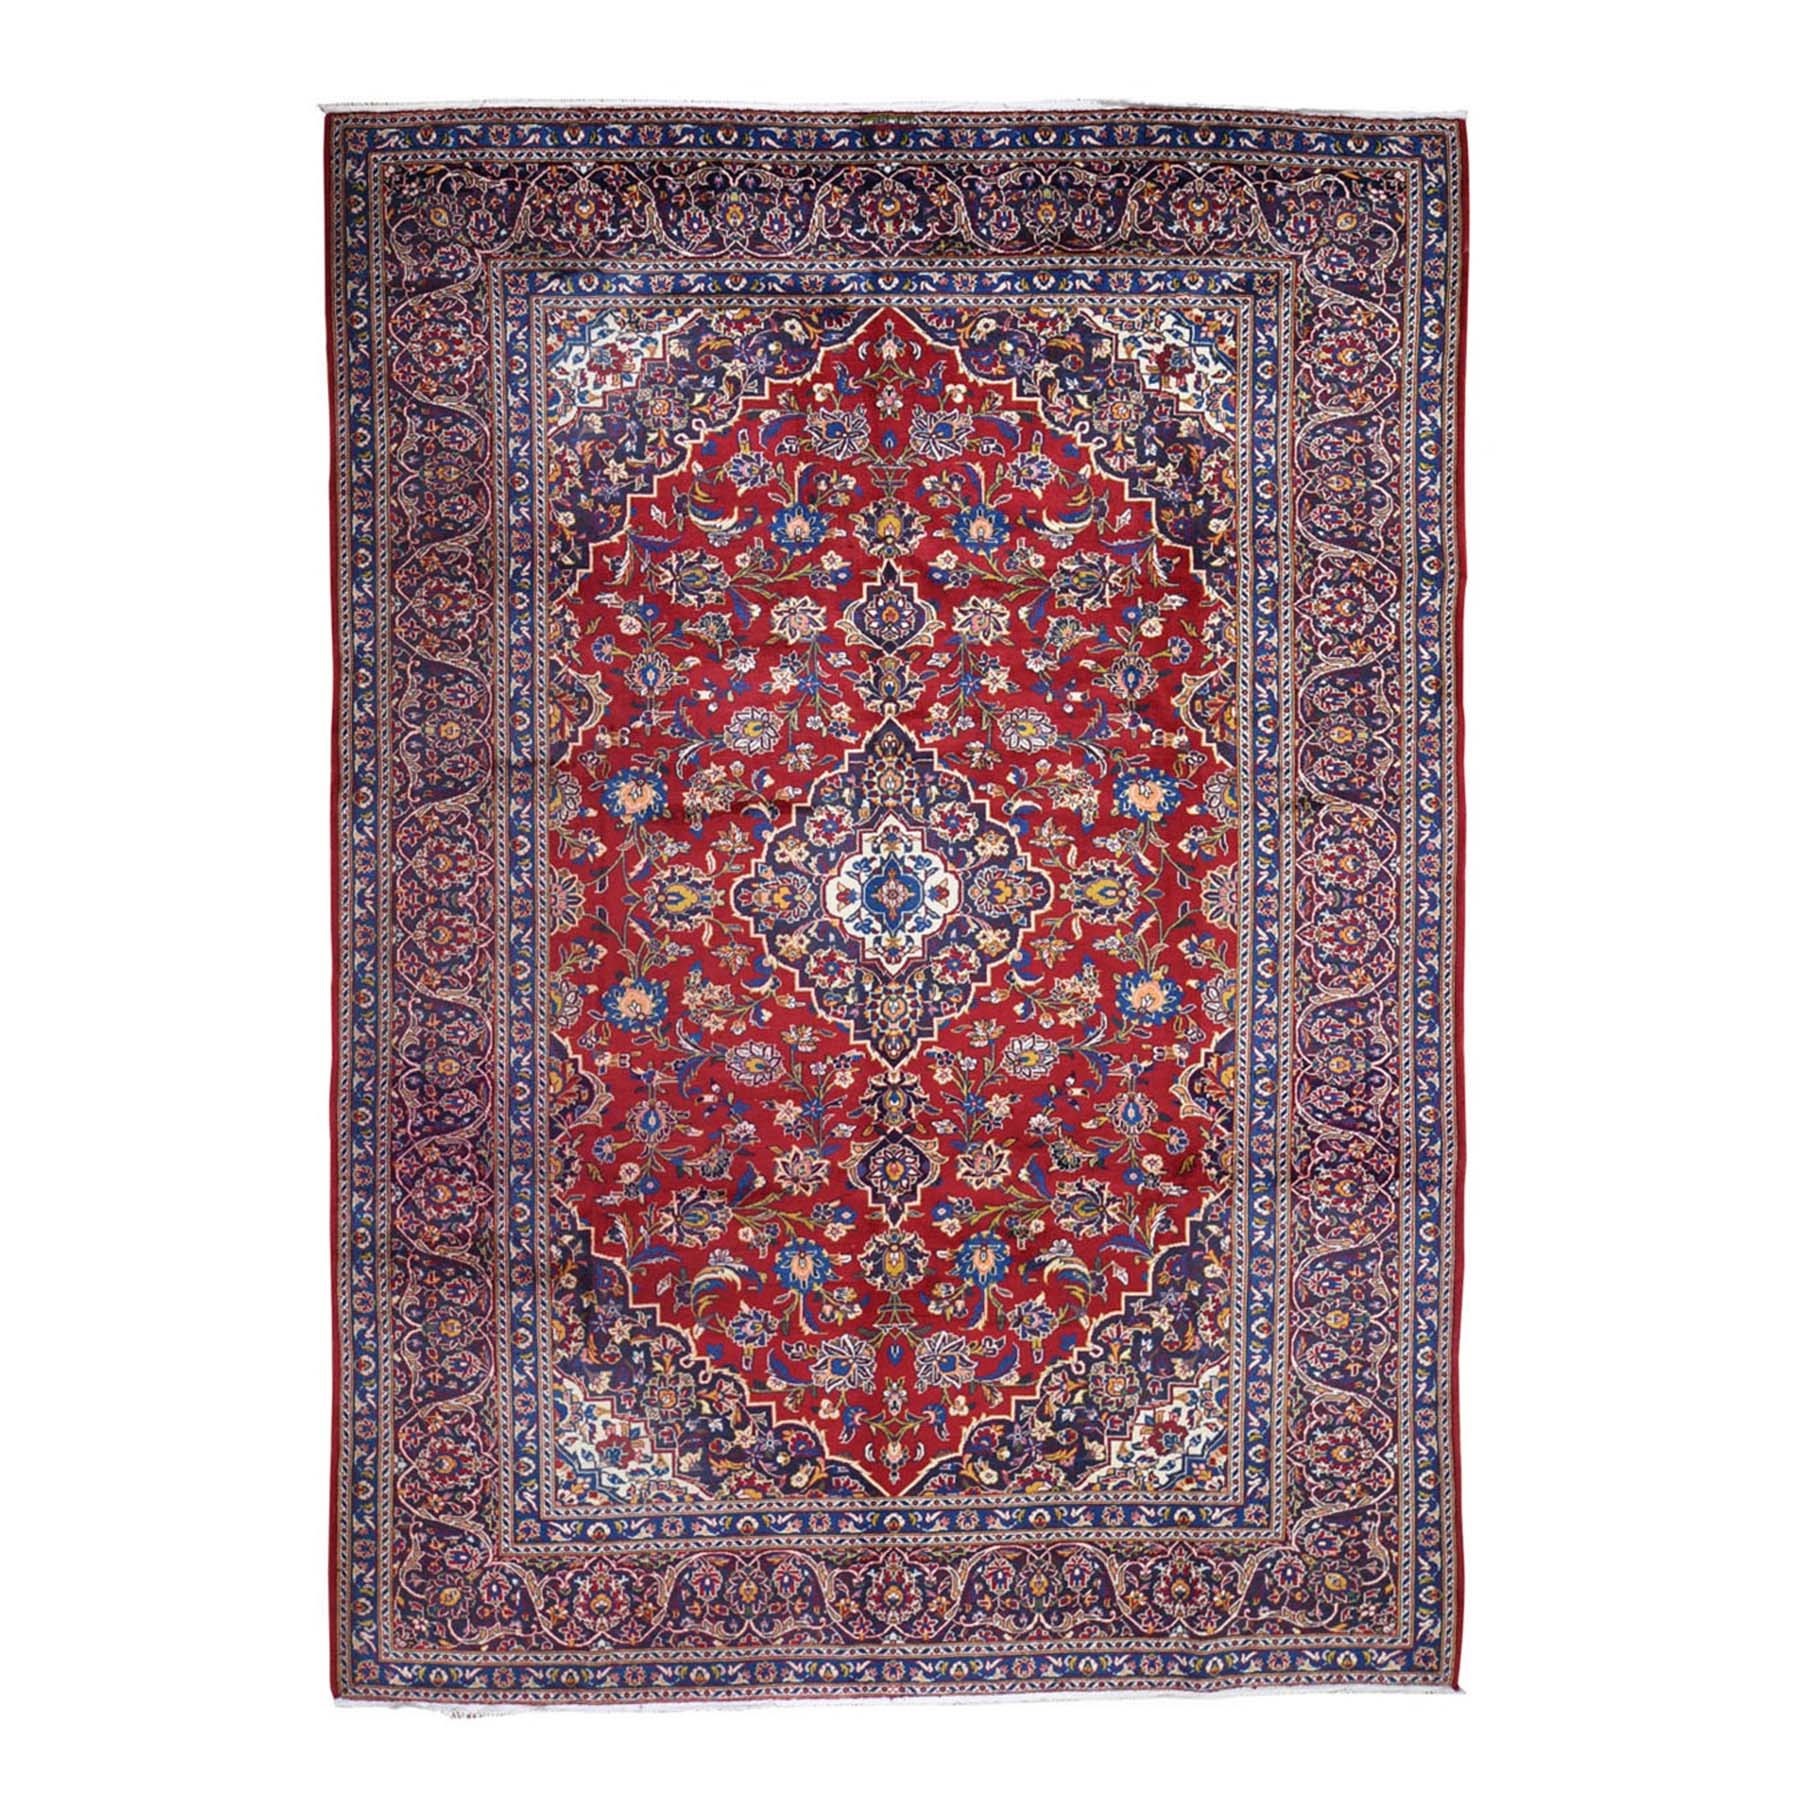 7'9"x11' Red Vintage Persian Kashan Pure Wool Exc Condition Hand Woven Oriental Rug 